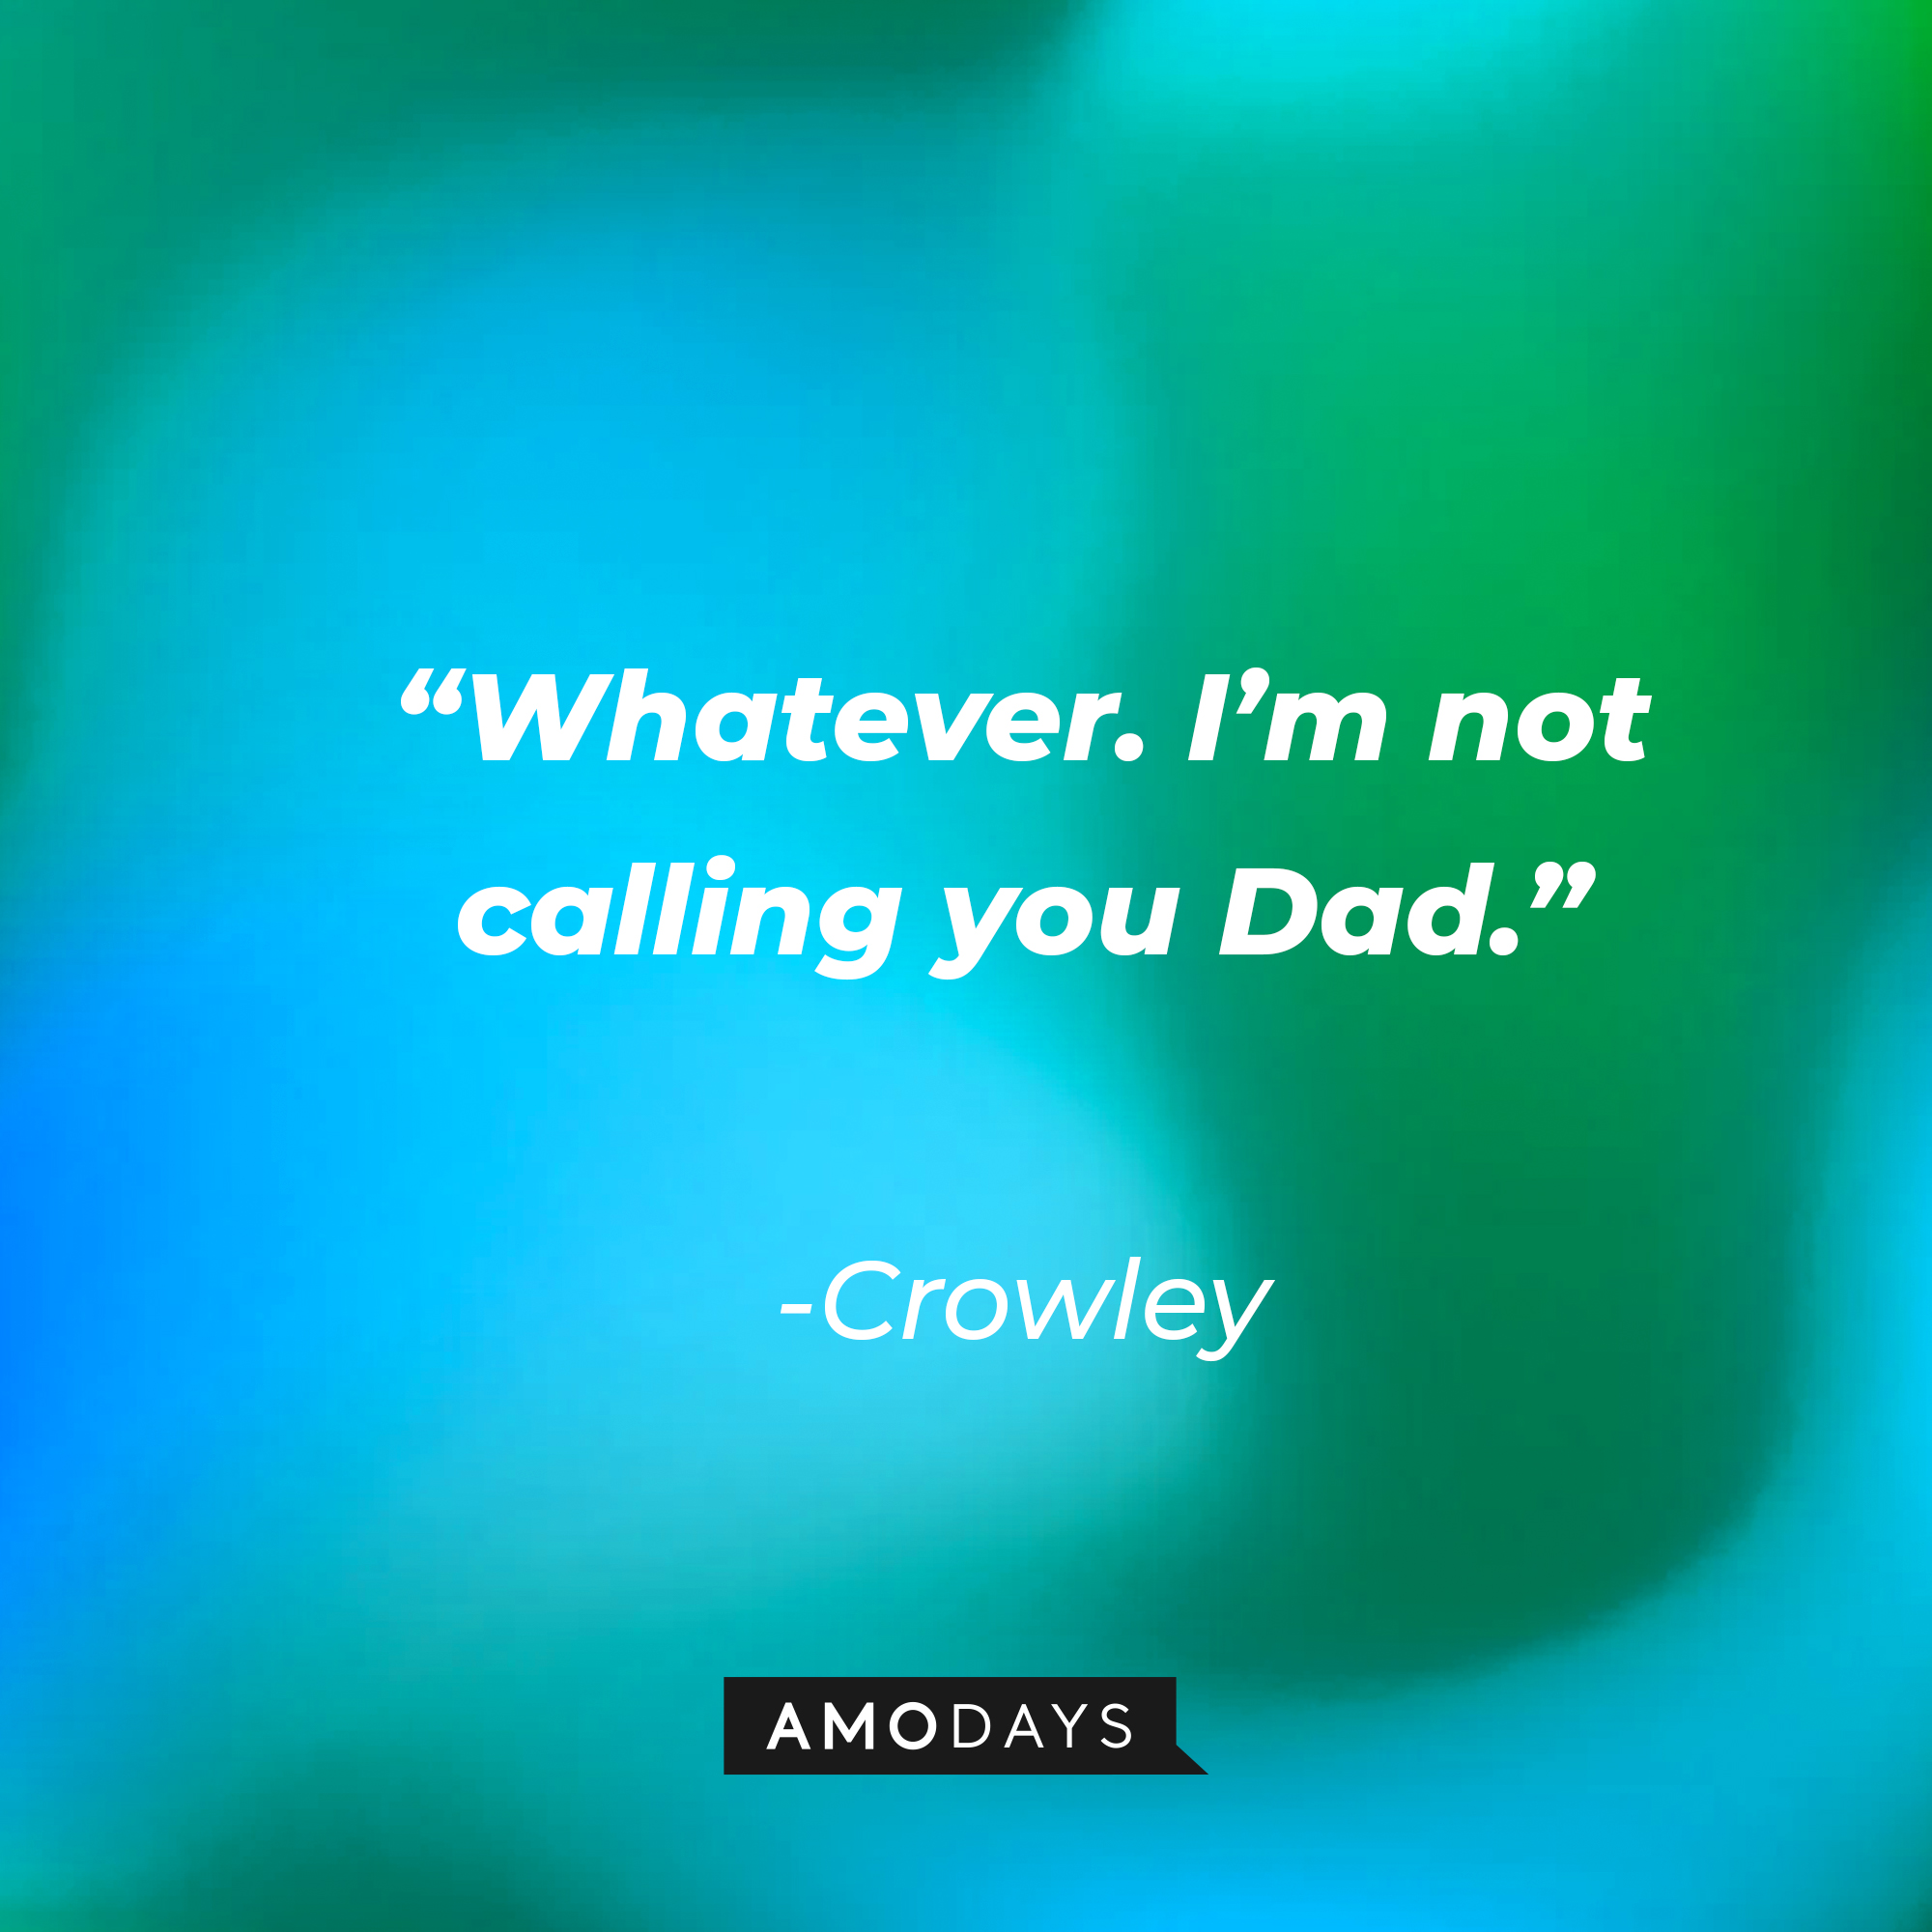 Crowley’s quote: “Whatever. I’m not calling you Dad.” | Source: AmoDays